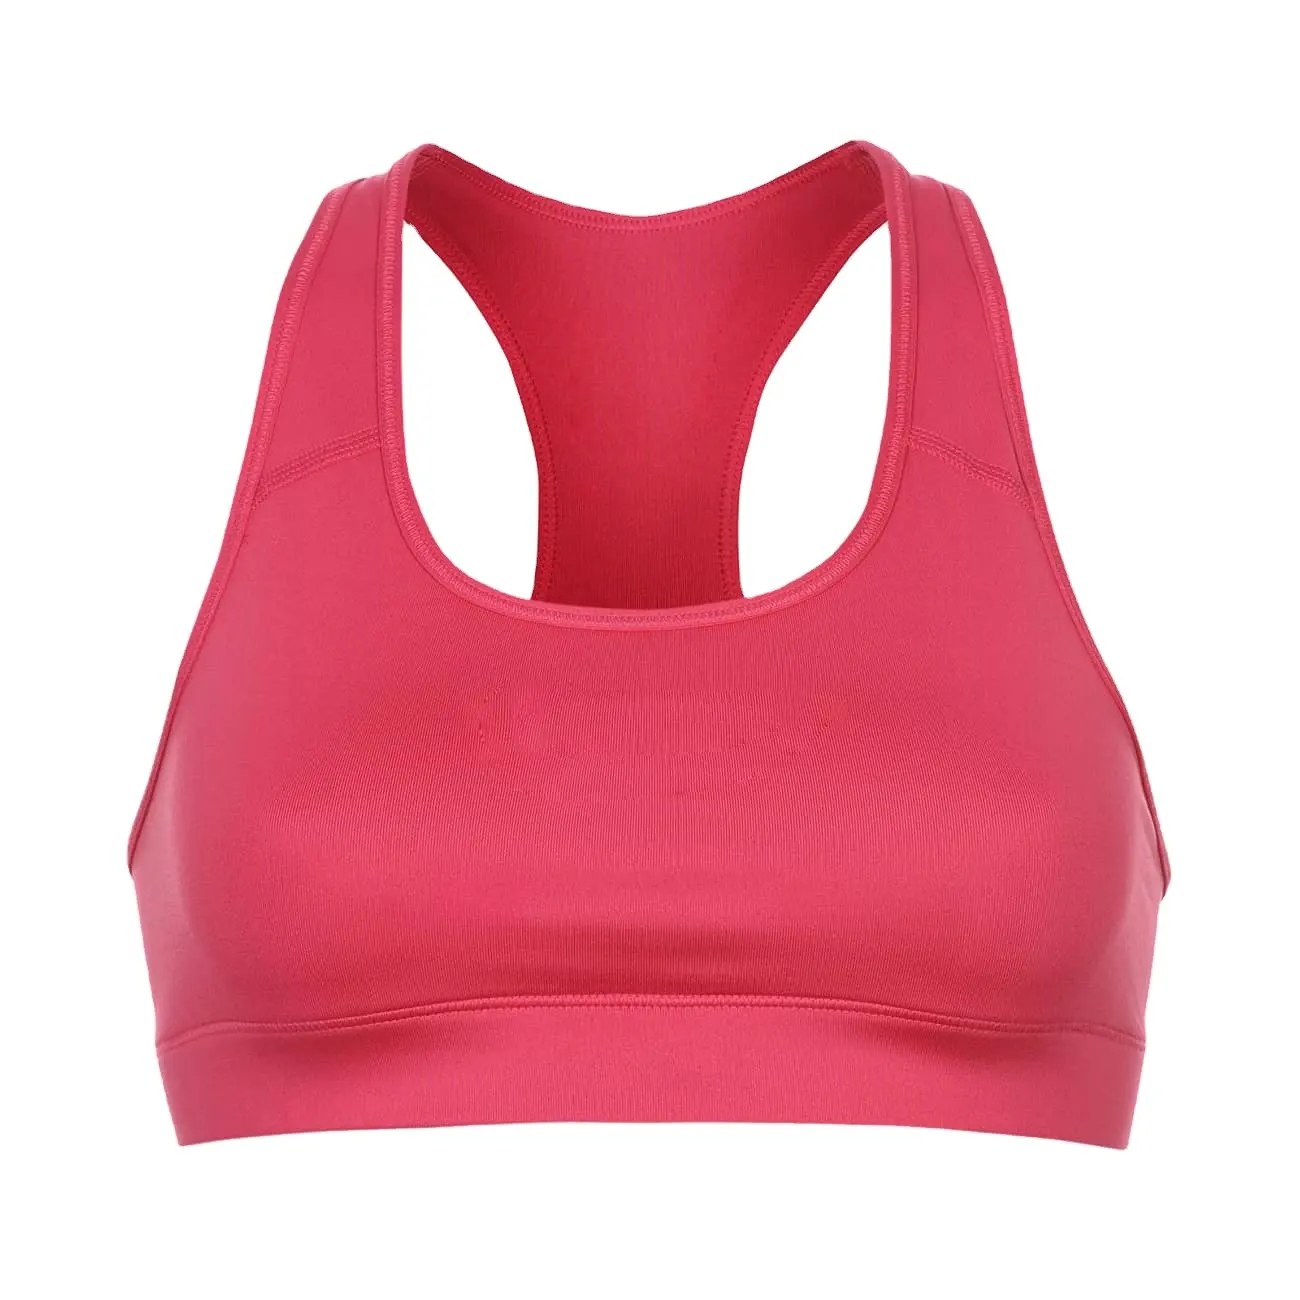 Pro Sports Bra 88% Polyester 12% Elastane Double Layers for a Compression Fit Lightweight Chest Band Racerback Strap Stabilizers